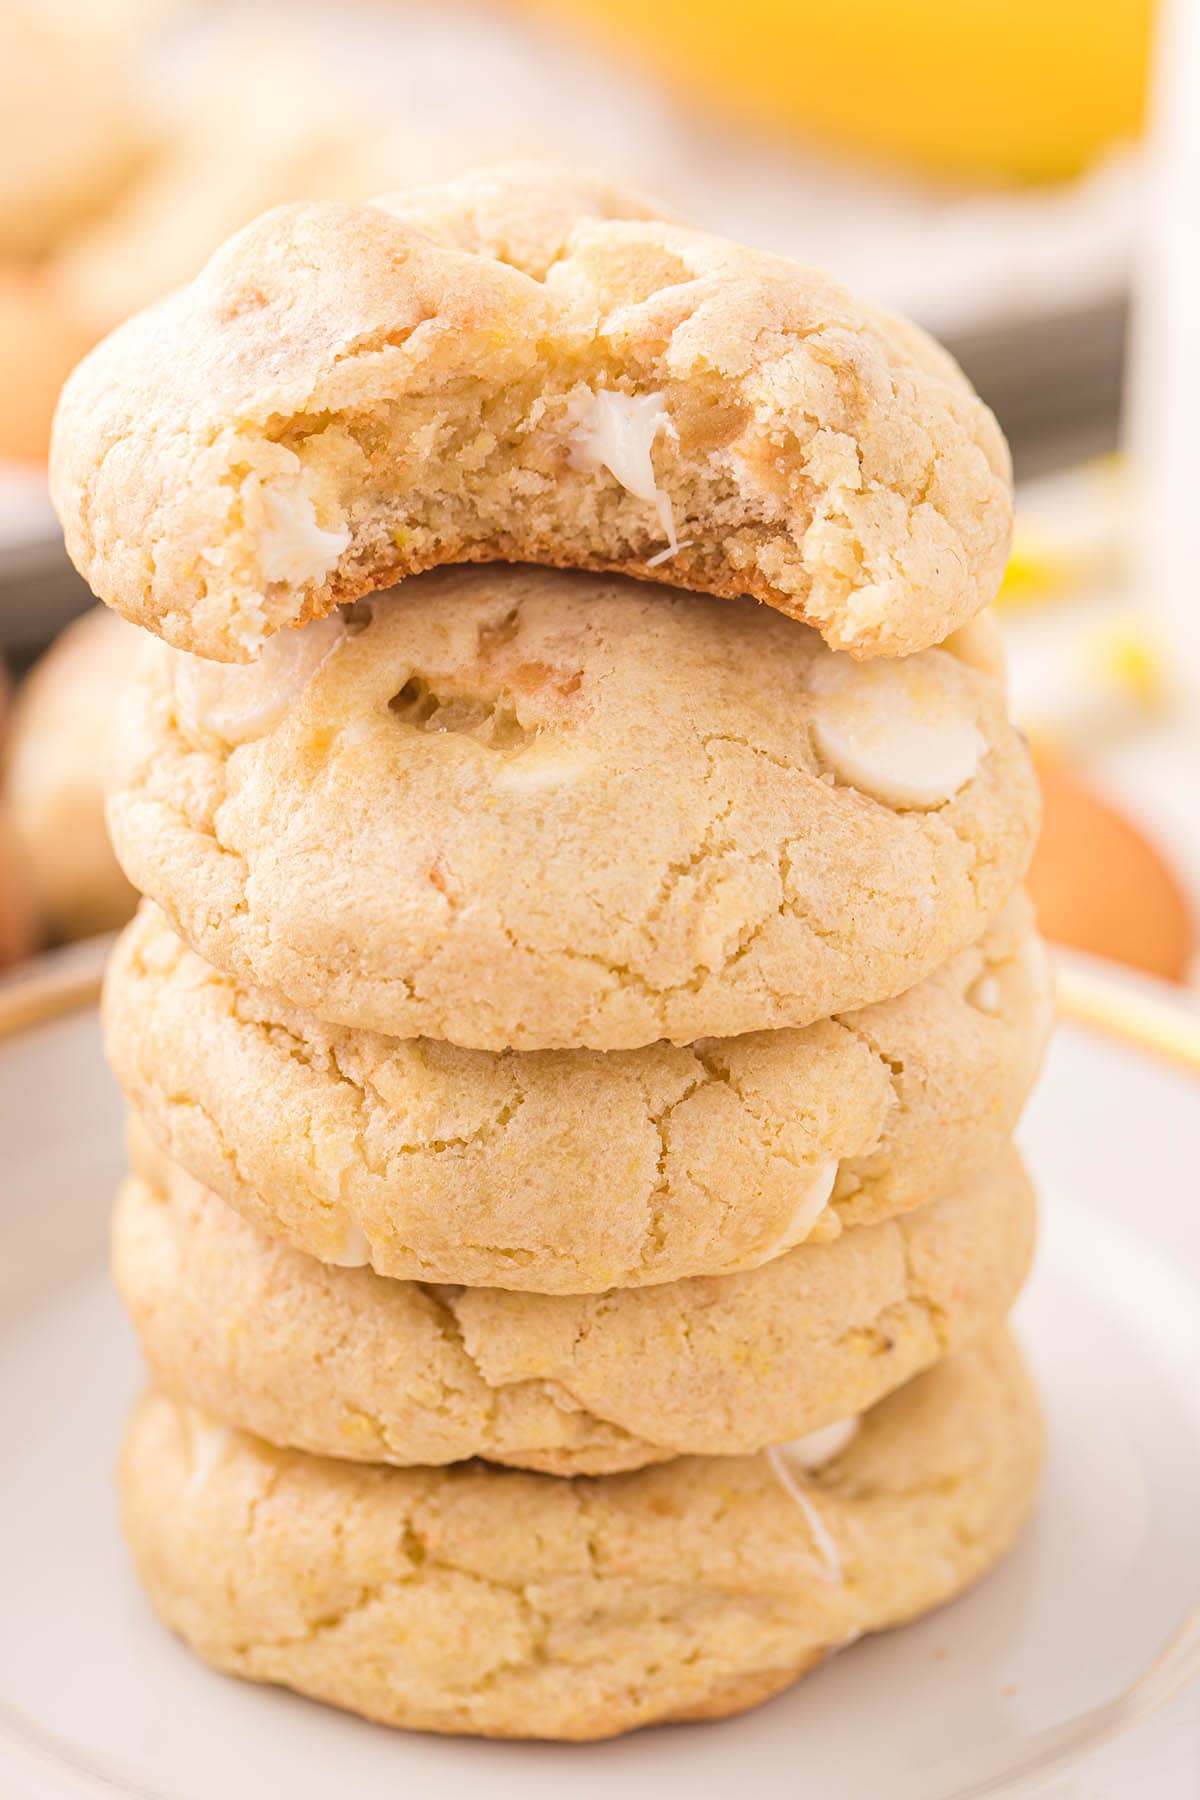 a couple of Banana Pudding Cookies stacked on a plate.